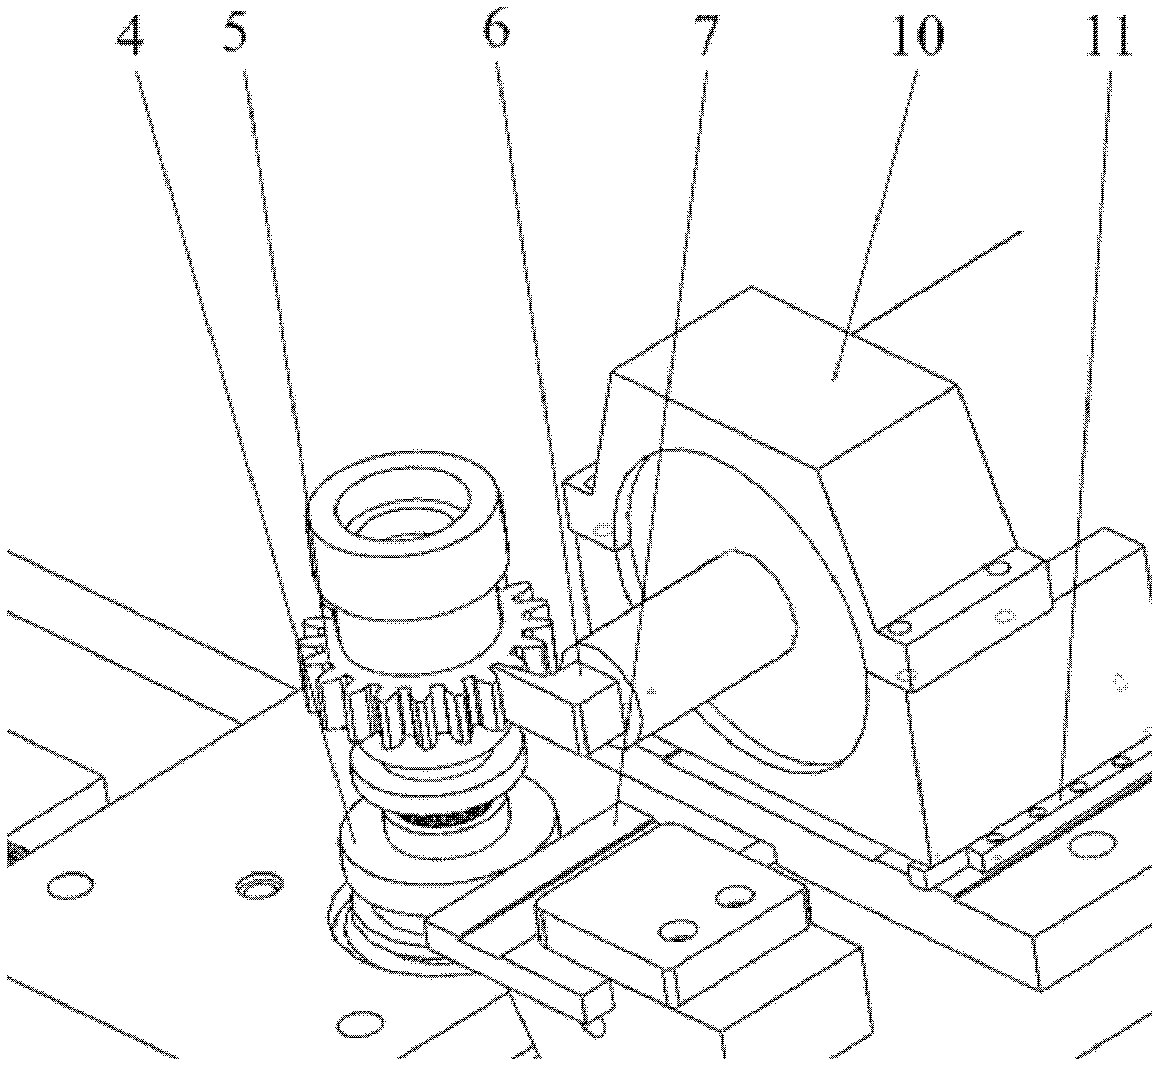 Ultrasonic strengthening device for gear tooth surfaces of involute cylindrical gears